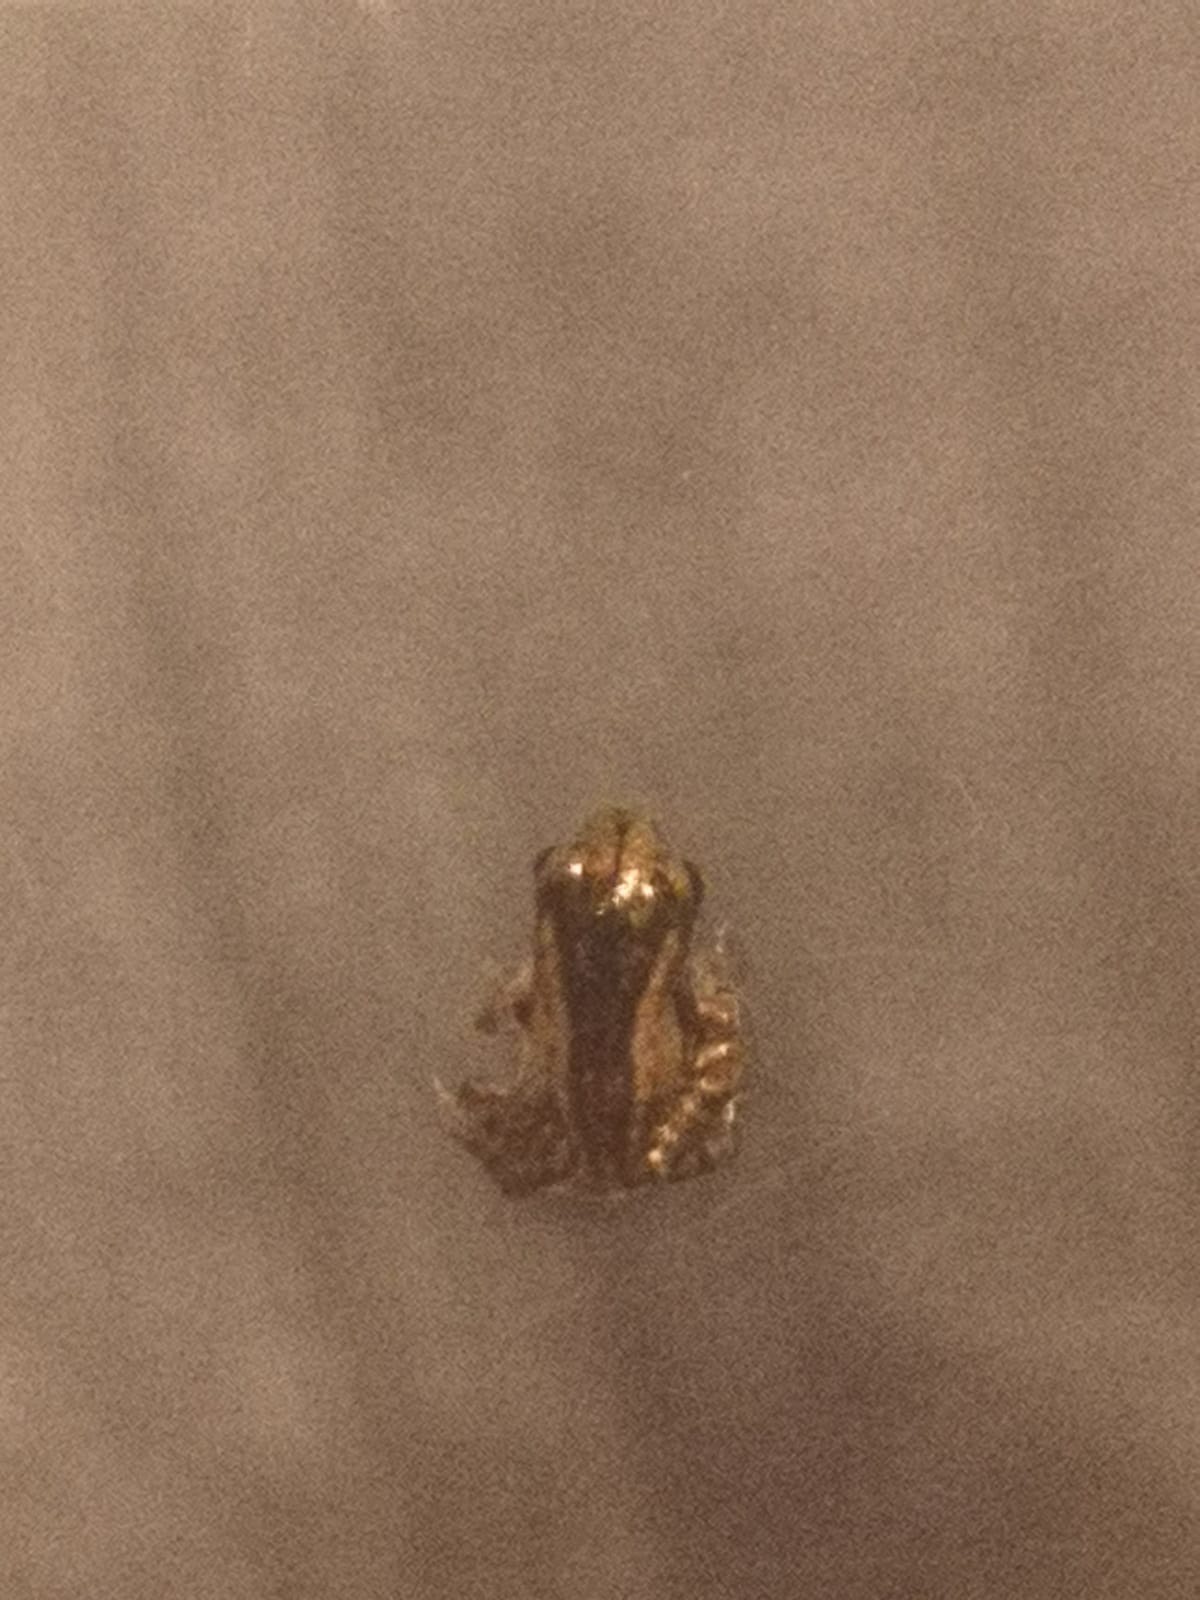 Smallest frog 3 mm